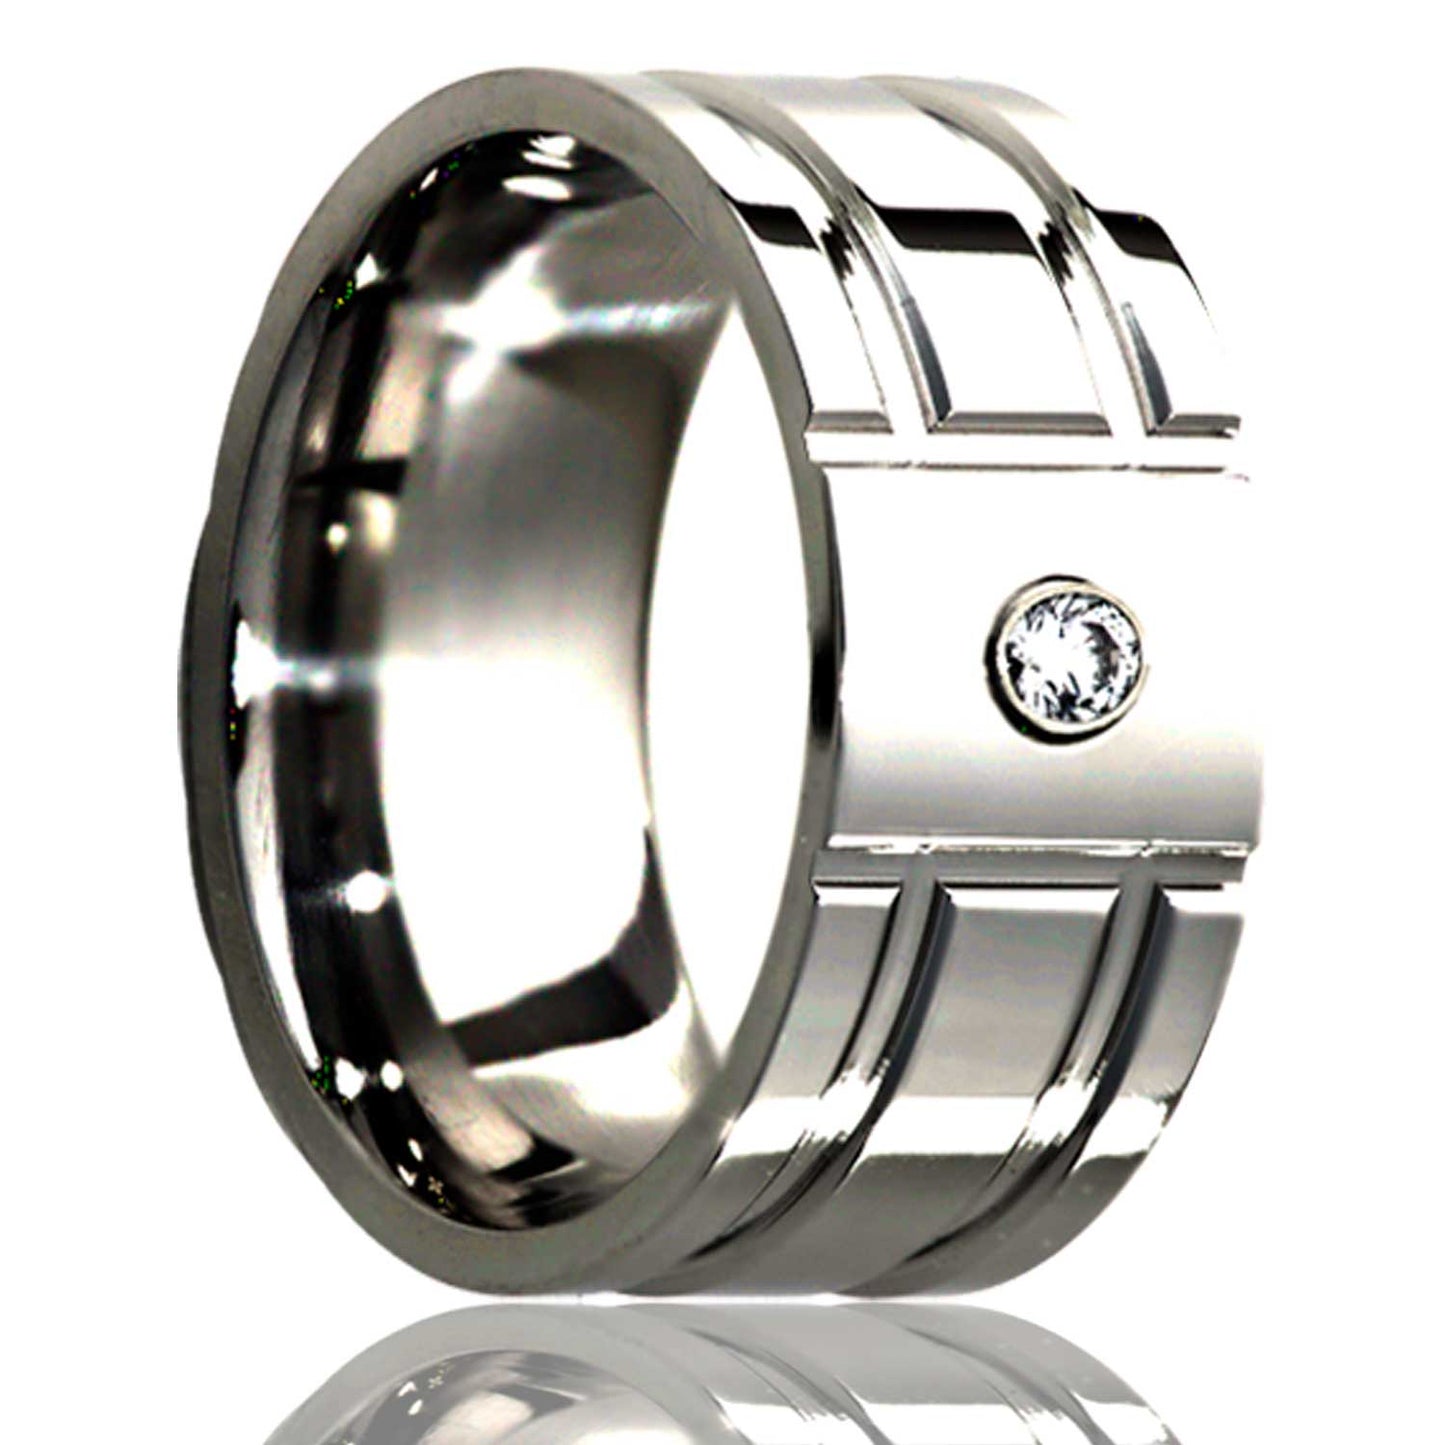 A grooved titanium men's wedding band with diamond displayed on a neutral white background.